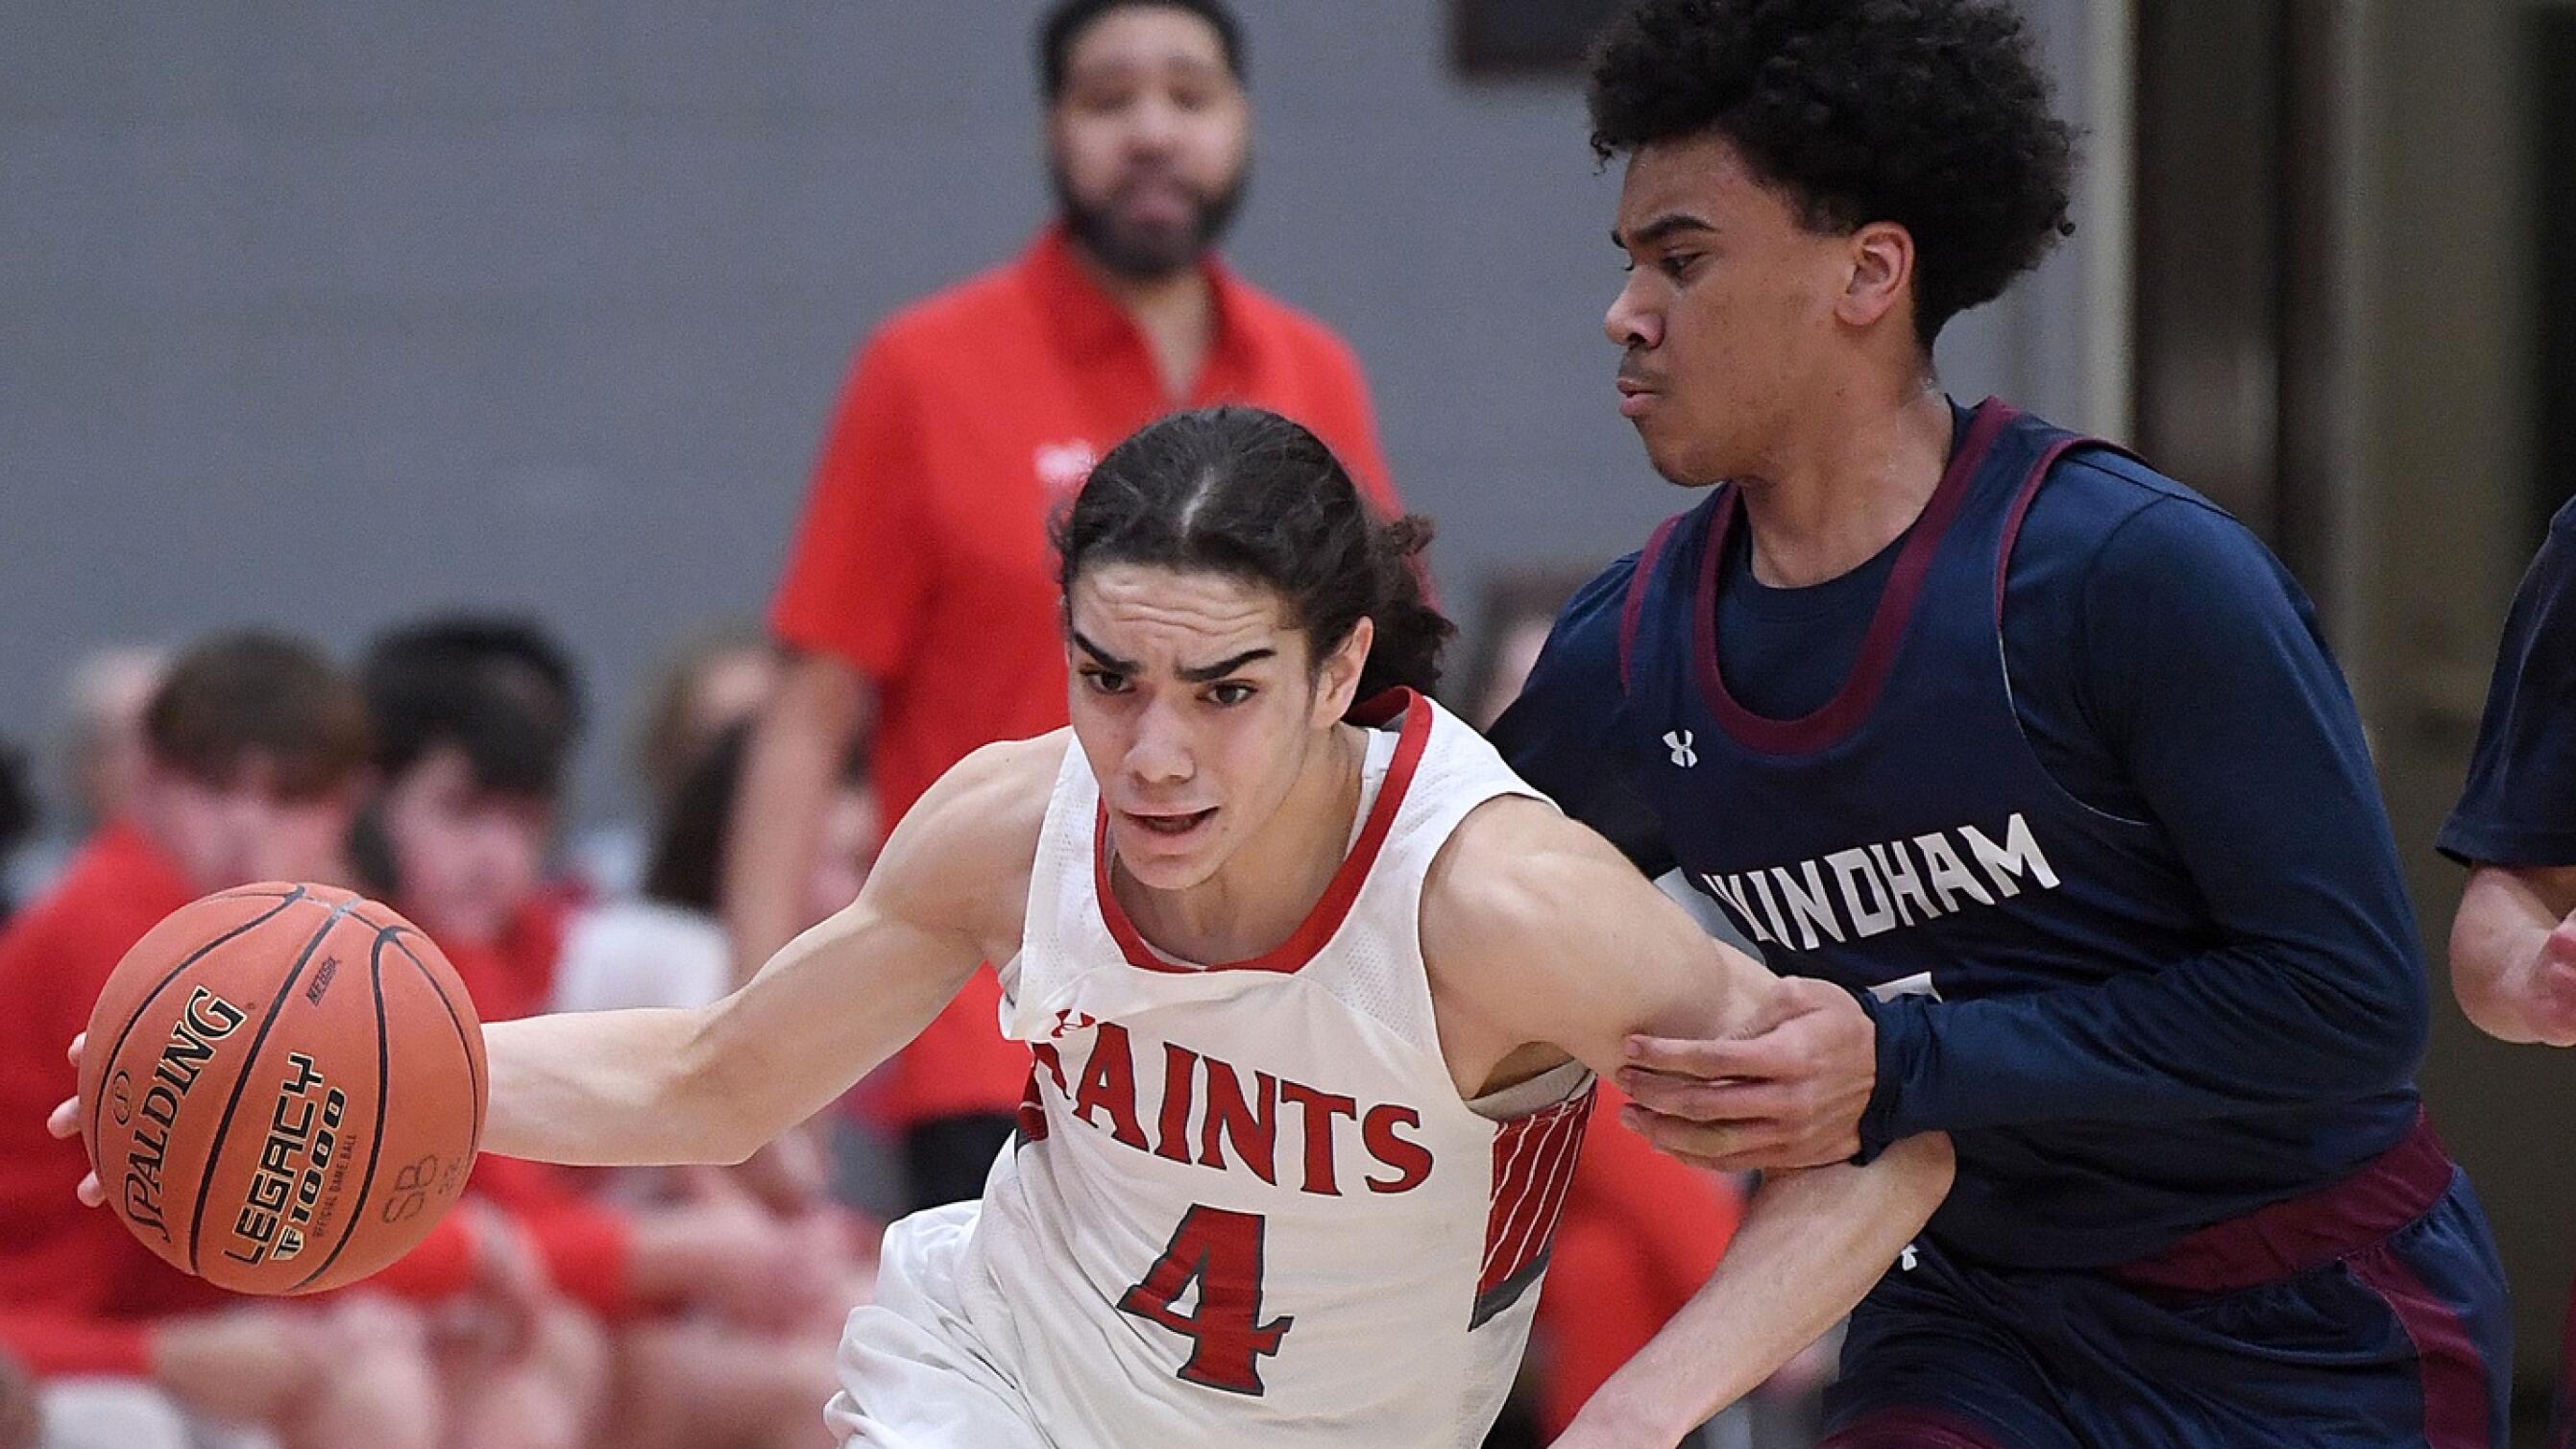 St. Bernard boys basketball fights past Windham for win